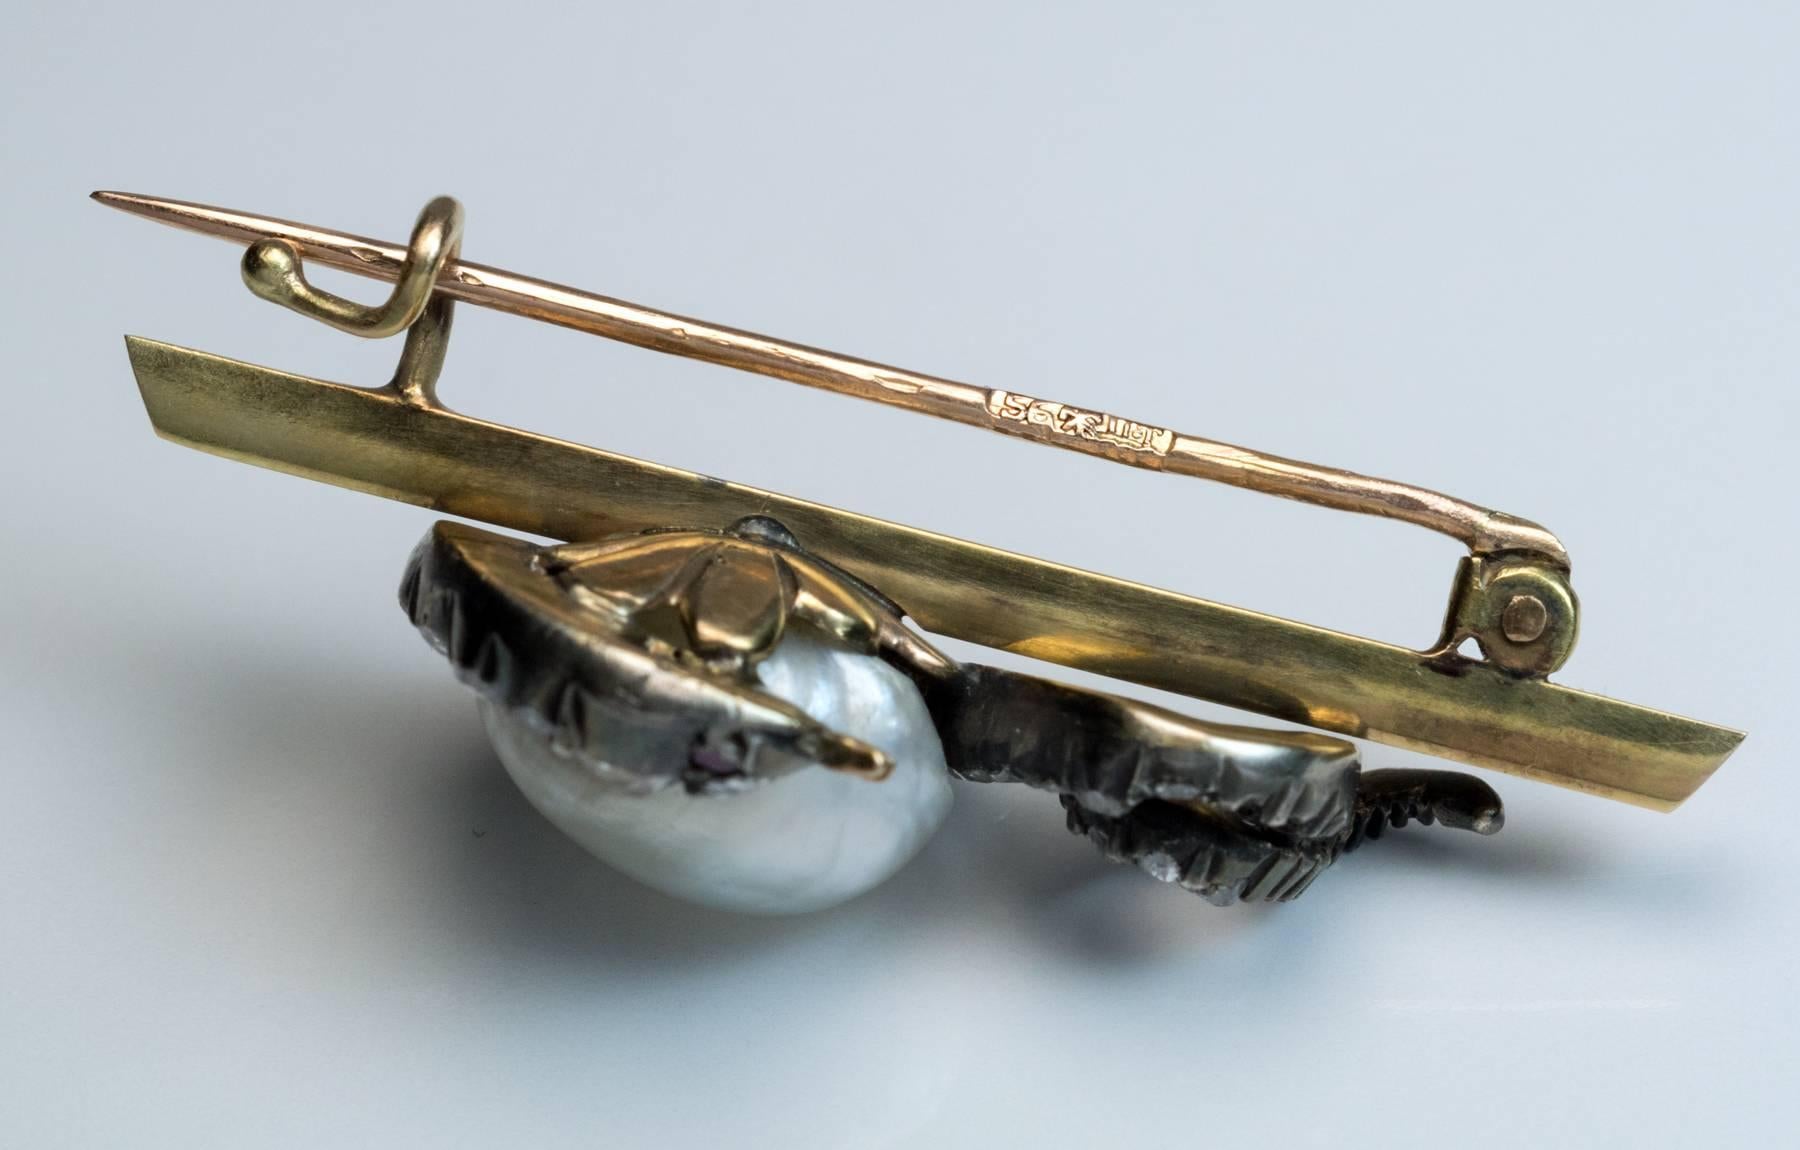 circa 1885

The brooch is designed as a diamond-set silver snake coiled around a large baroque natural pearl. The snake and pearl are mounted on a 14K gold bar.

The pearl is approximately 10.8 x 8.3 mm.

The eyes of the snake are set with red